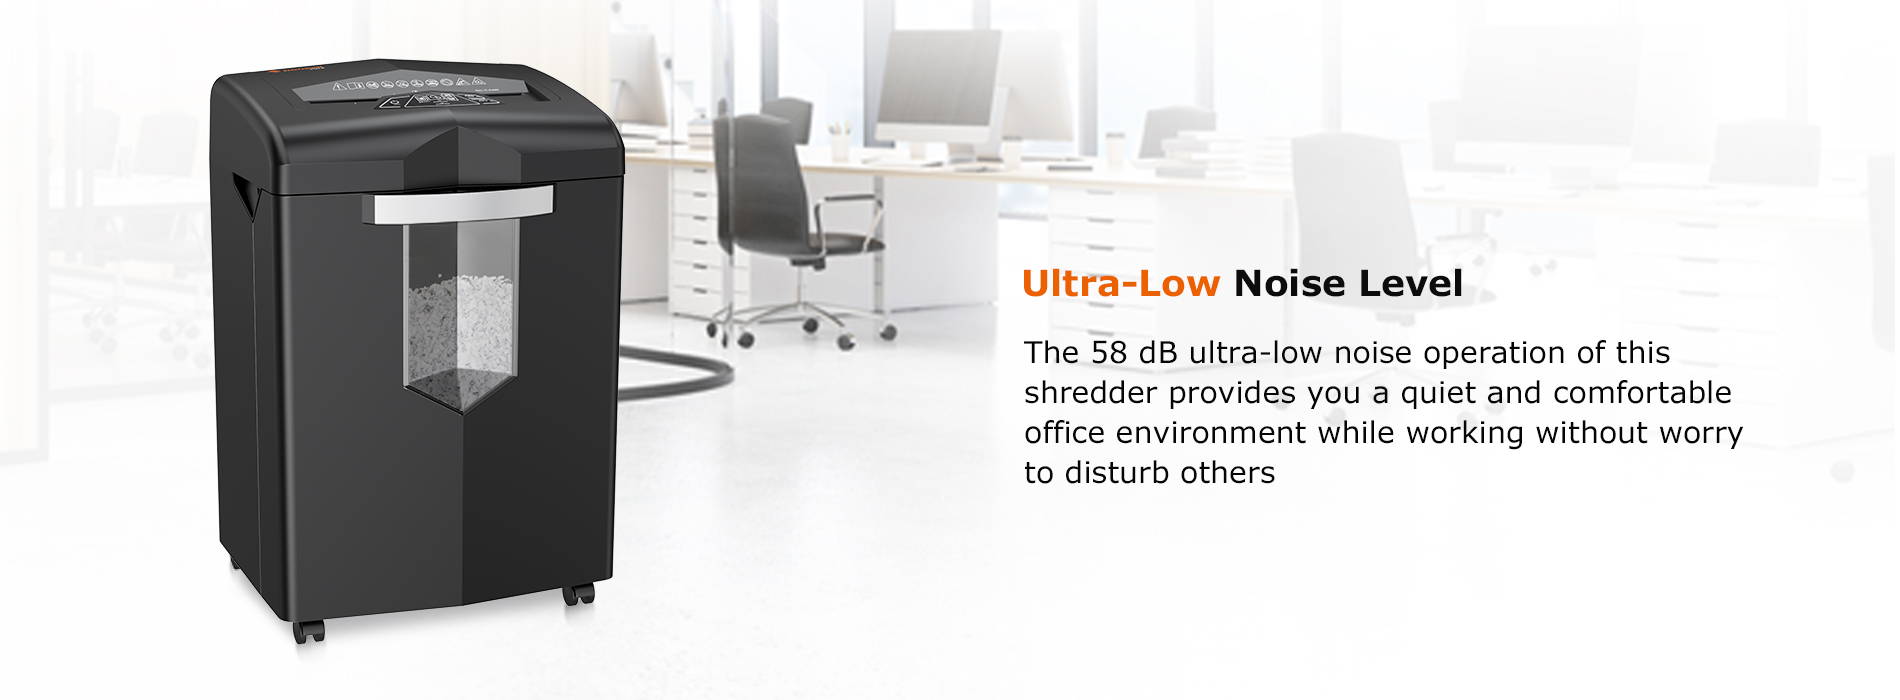 Ultra-Low Noise Level  The 58 dB ultra-low noise operation of this shredder provides you a quiet and comfortable office environment while working without worry to disturb others